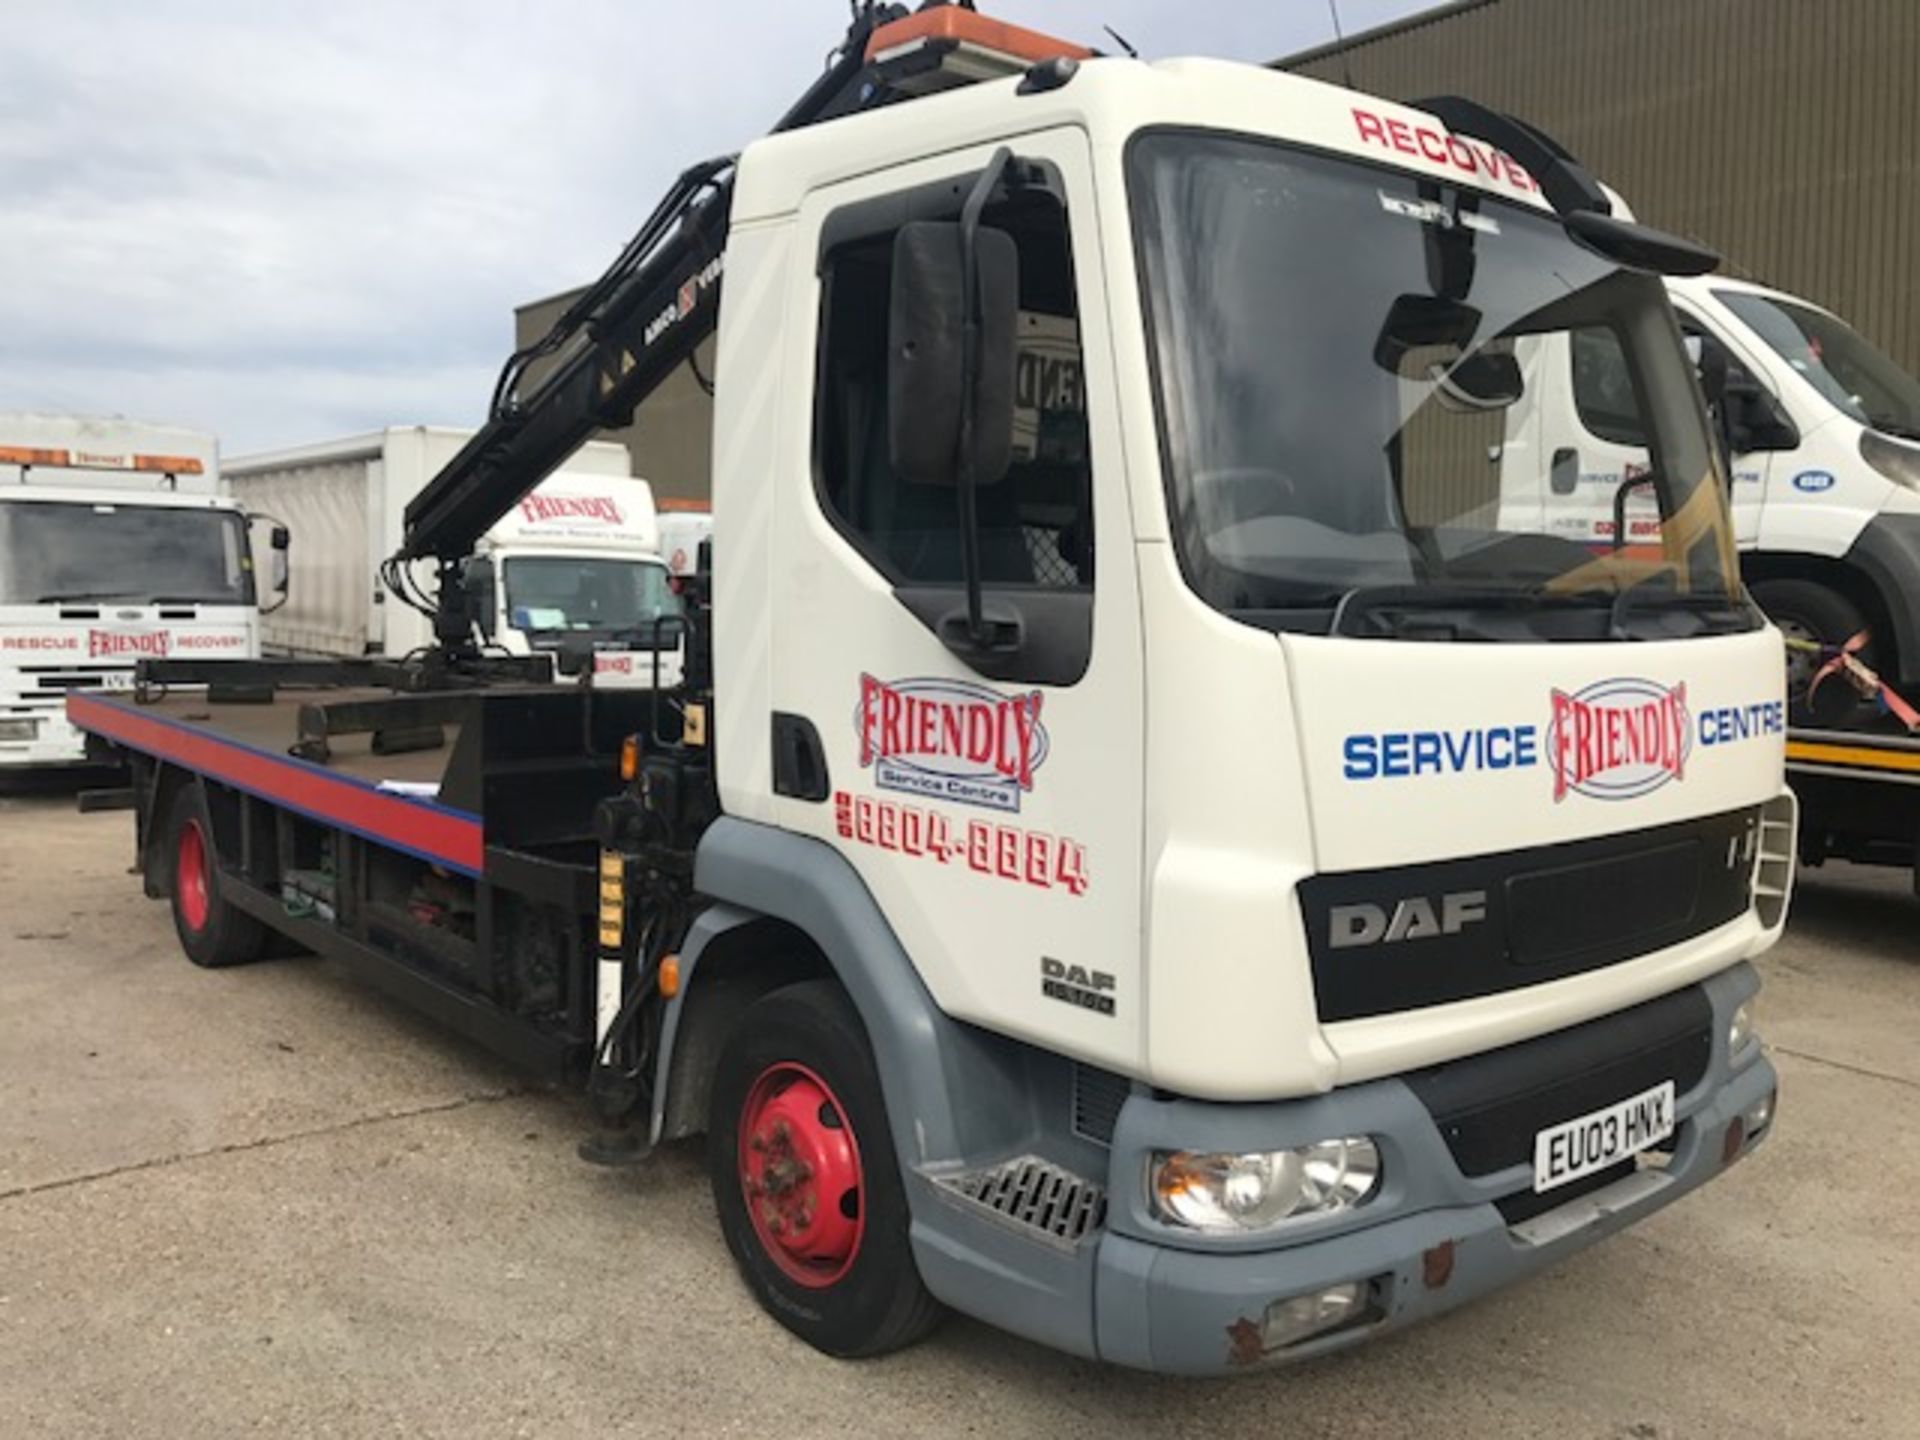 2003 DAF FA LF45.150 7.5T flat bed breakdown recovery vehicle with Amco veba hiab lift, winch and